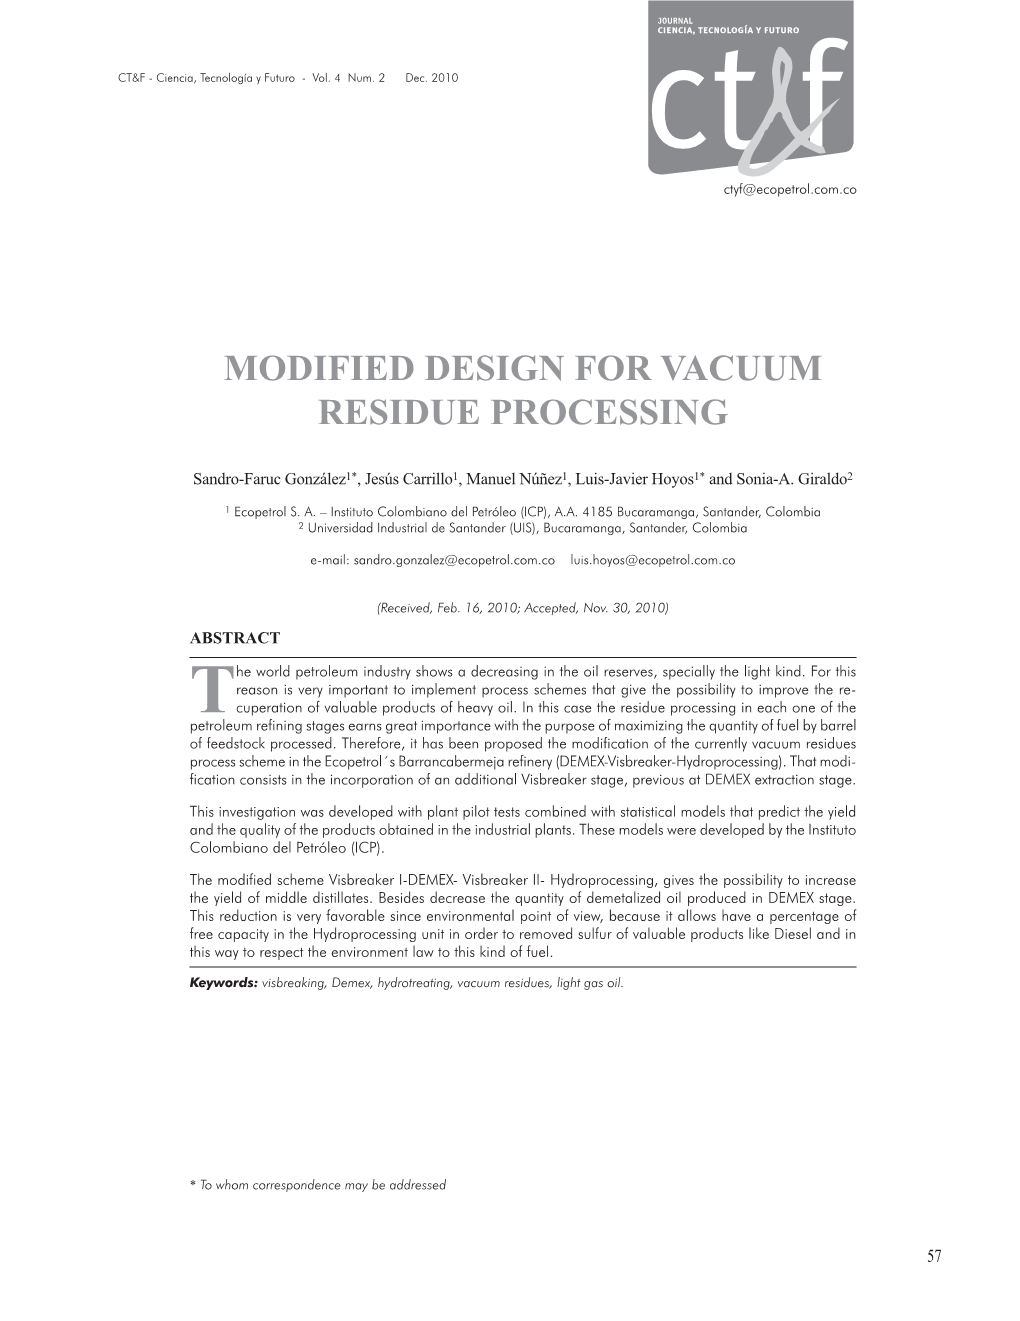 Modified Design for Vacuum Residue Processing